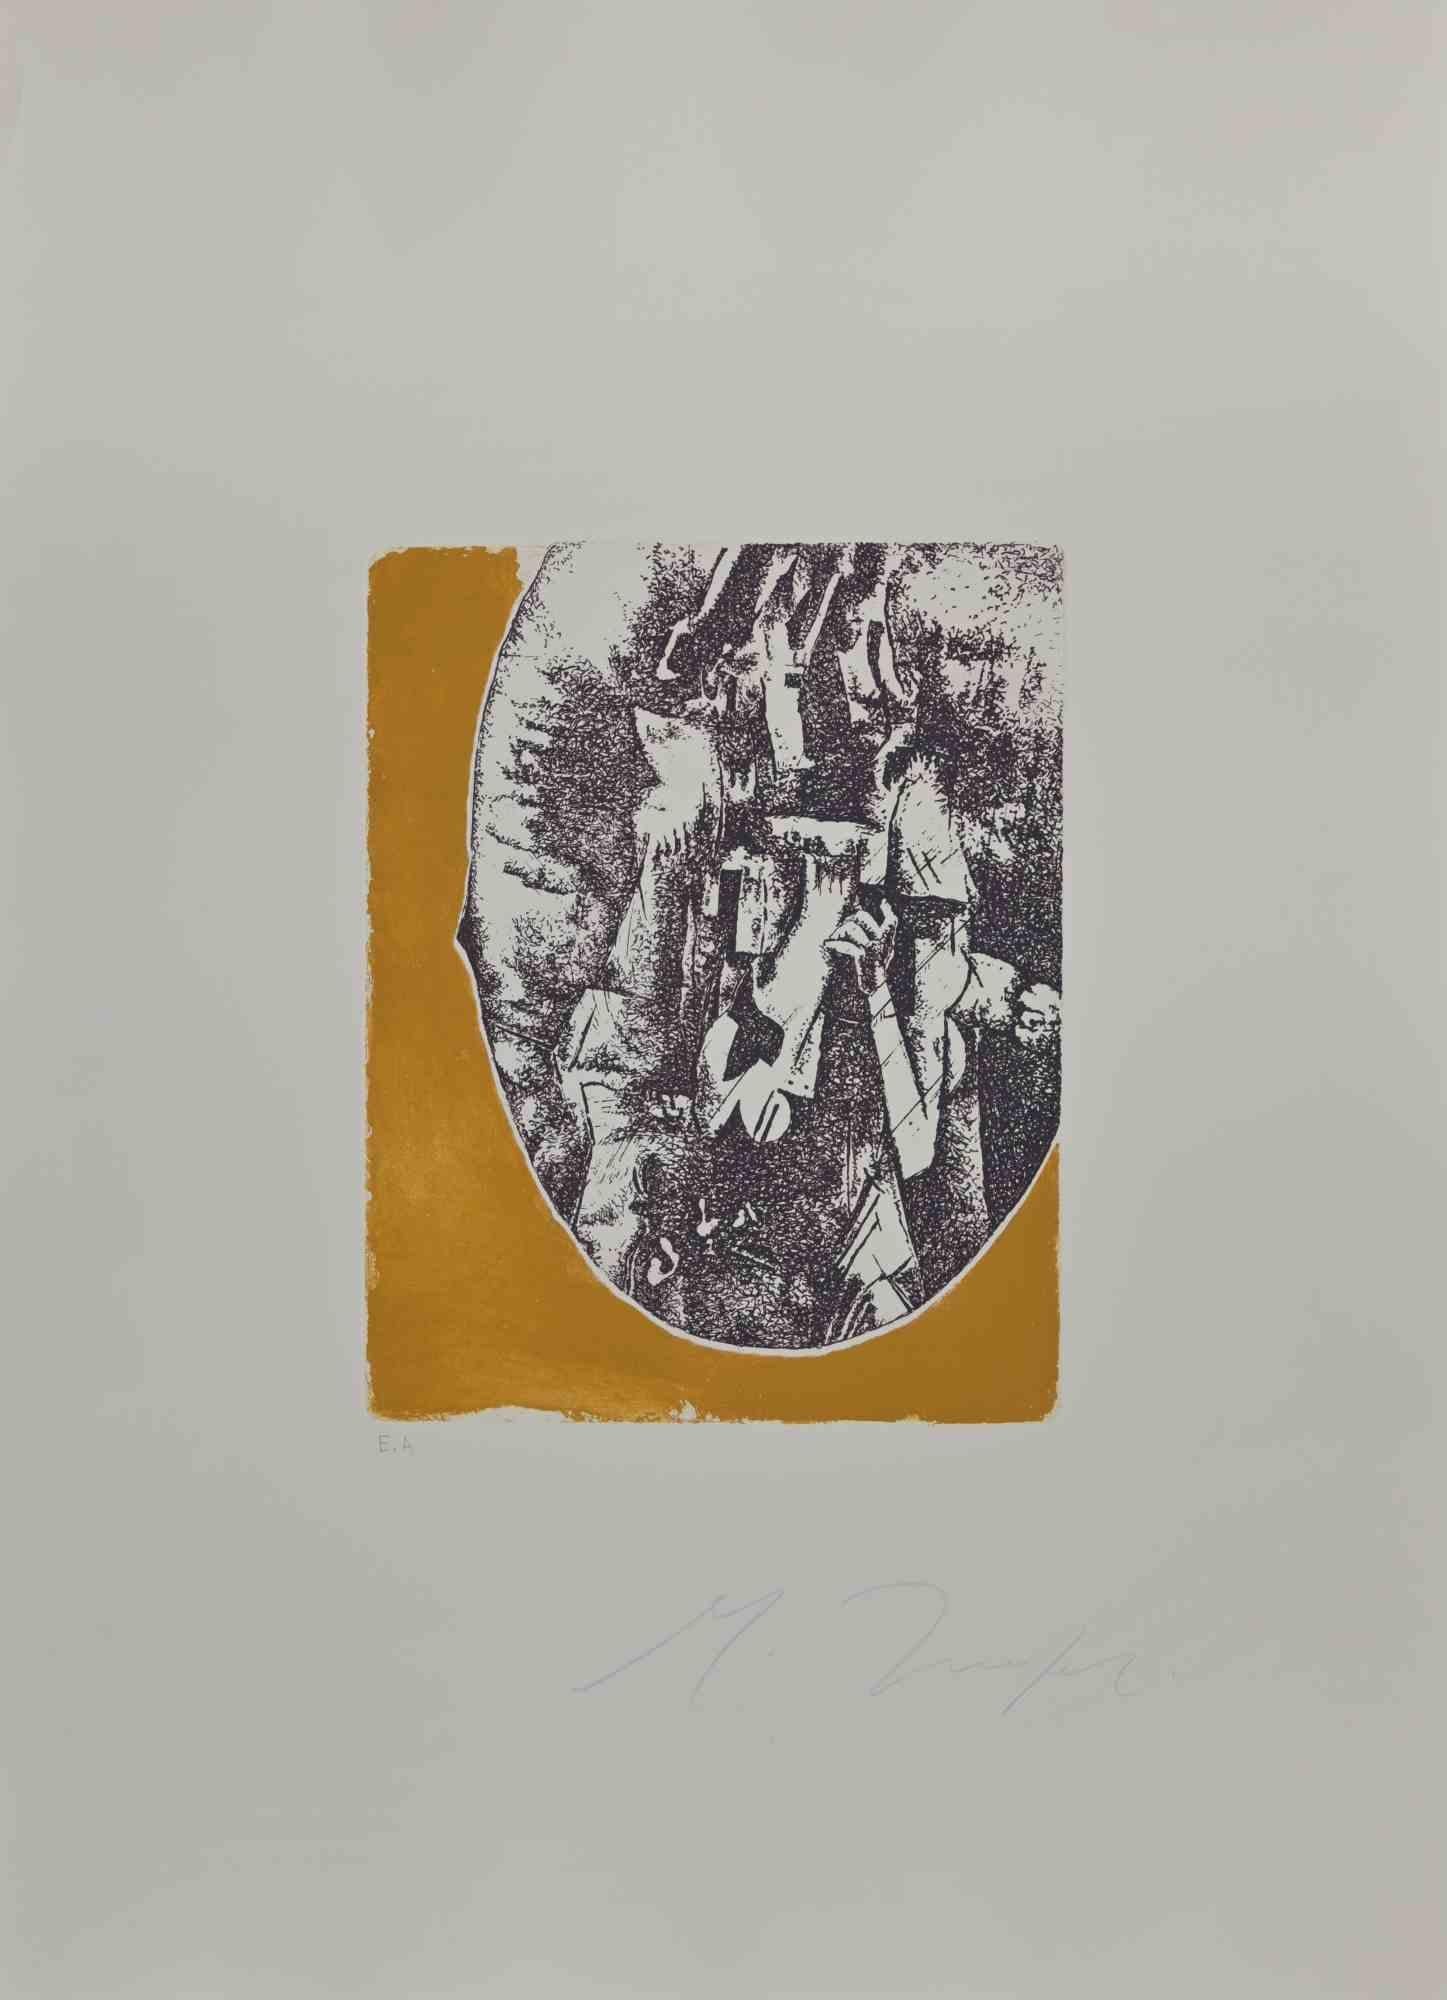 After Braque is an etching realized by Mino Trafeli in 1980. 

70 x 50 cm, not framed.

Good conditions.

Mino Trafeli (Volterra, December 29, 1922 - Volterra, August 9, 2018) was an Italian sculptor and partisan.

Fundamental to his education is